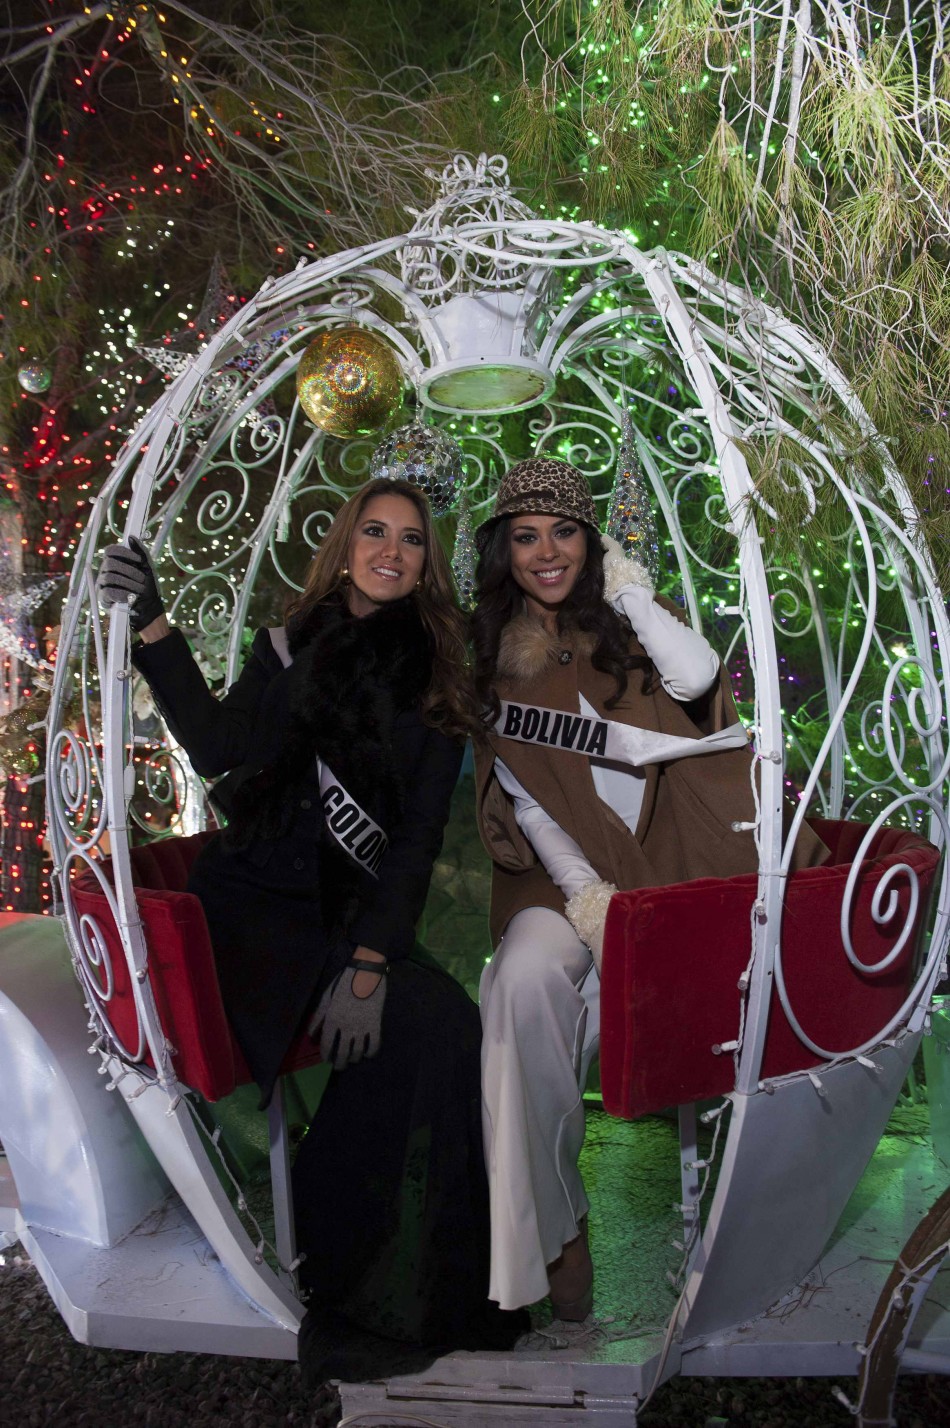 Miss Colombia Vasquez and Miss Bolivia Mouton pose during the Miss Universe National Gift Auction in Las Vegas